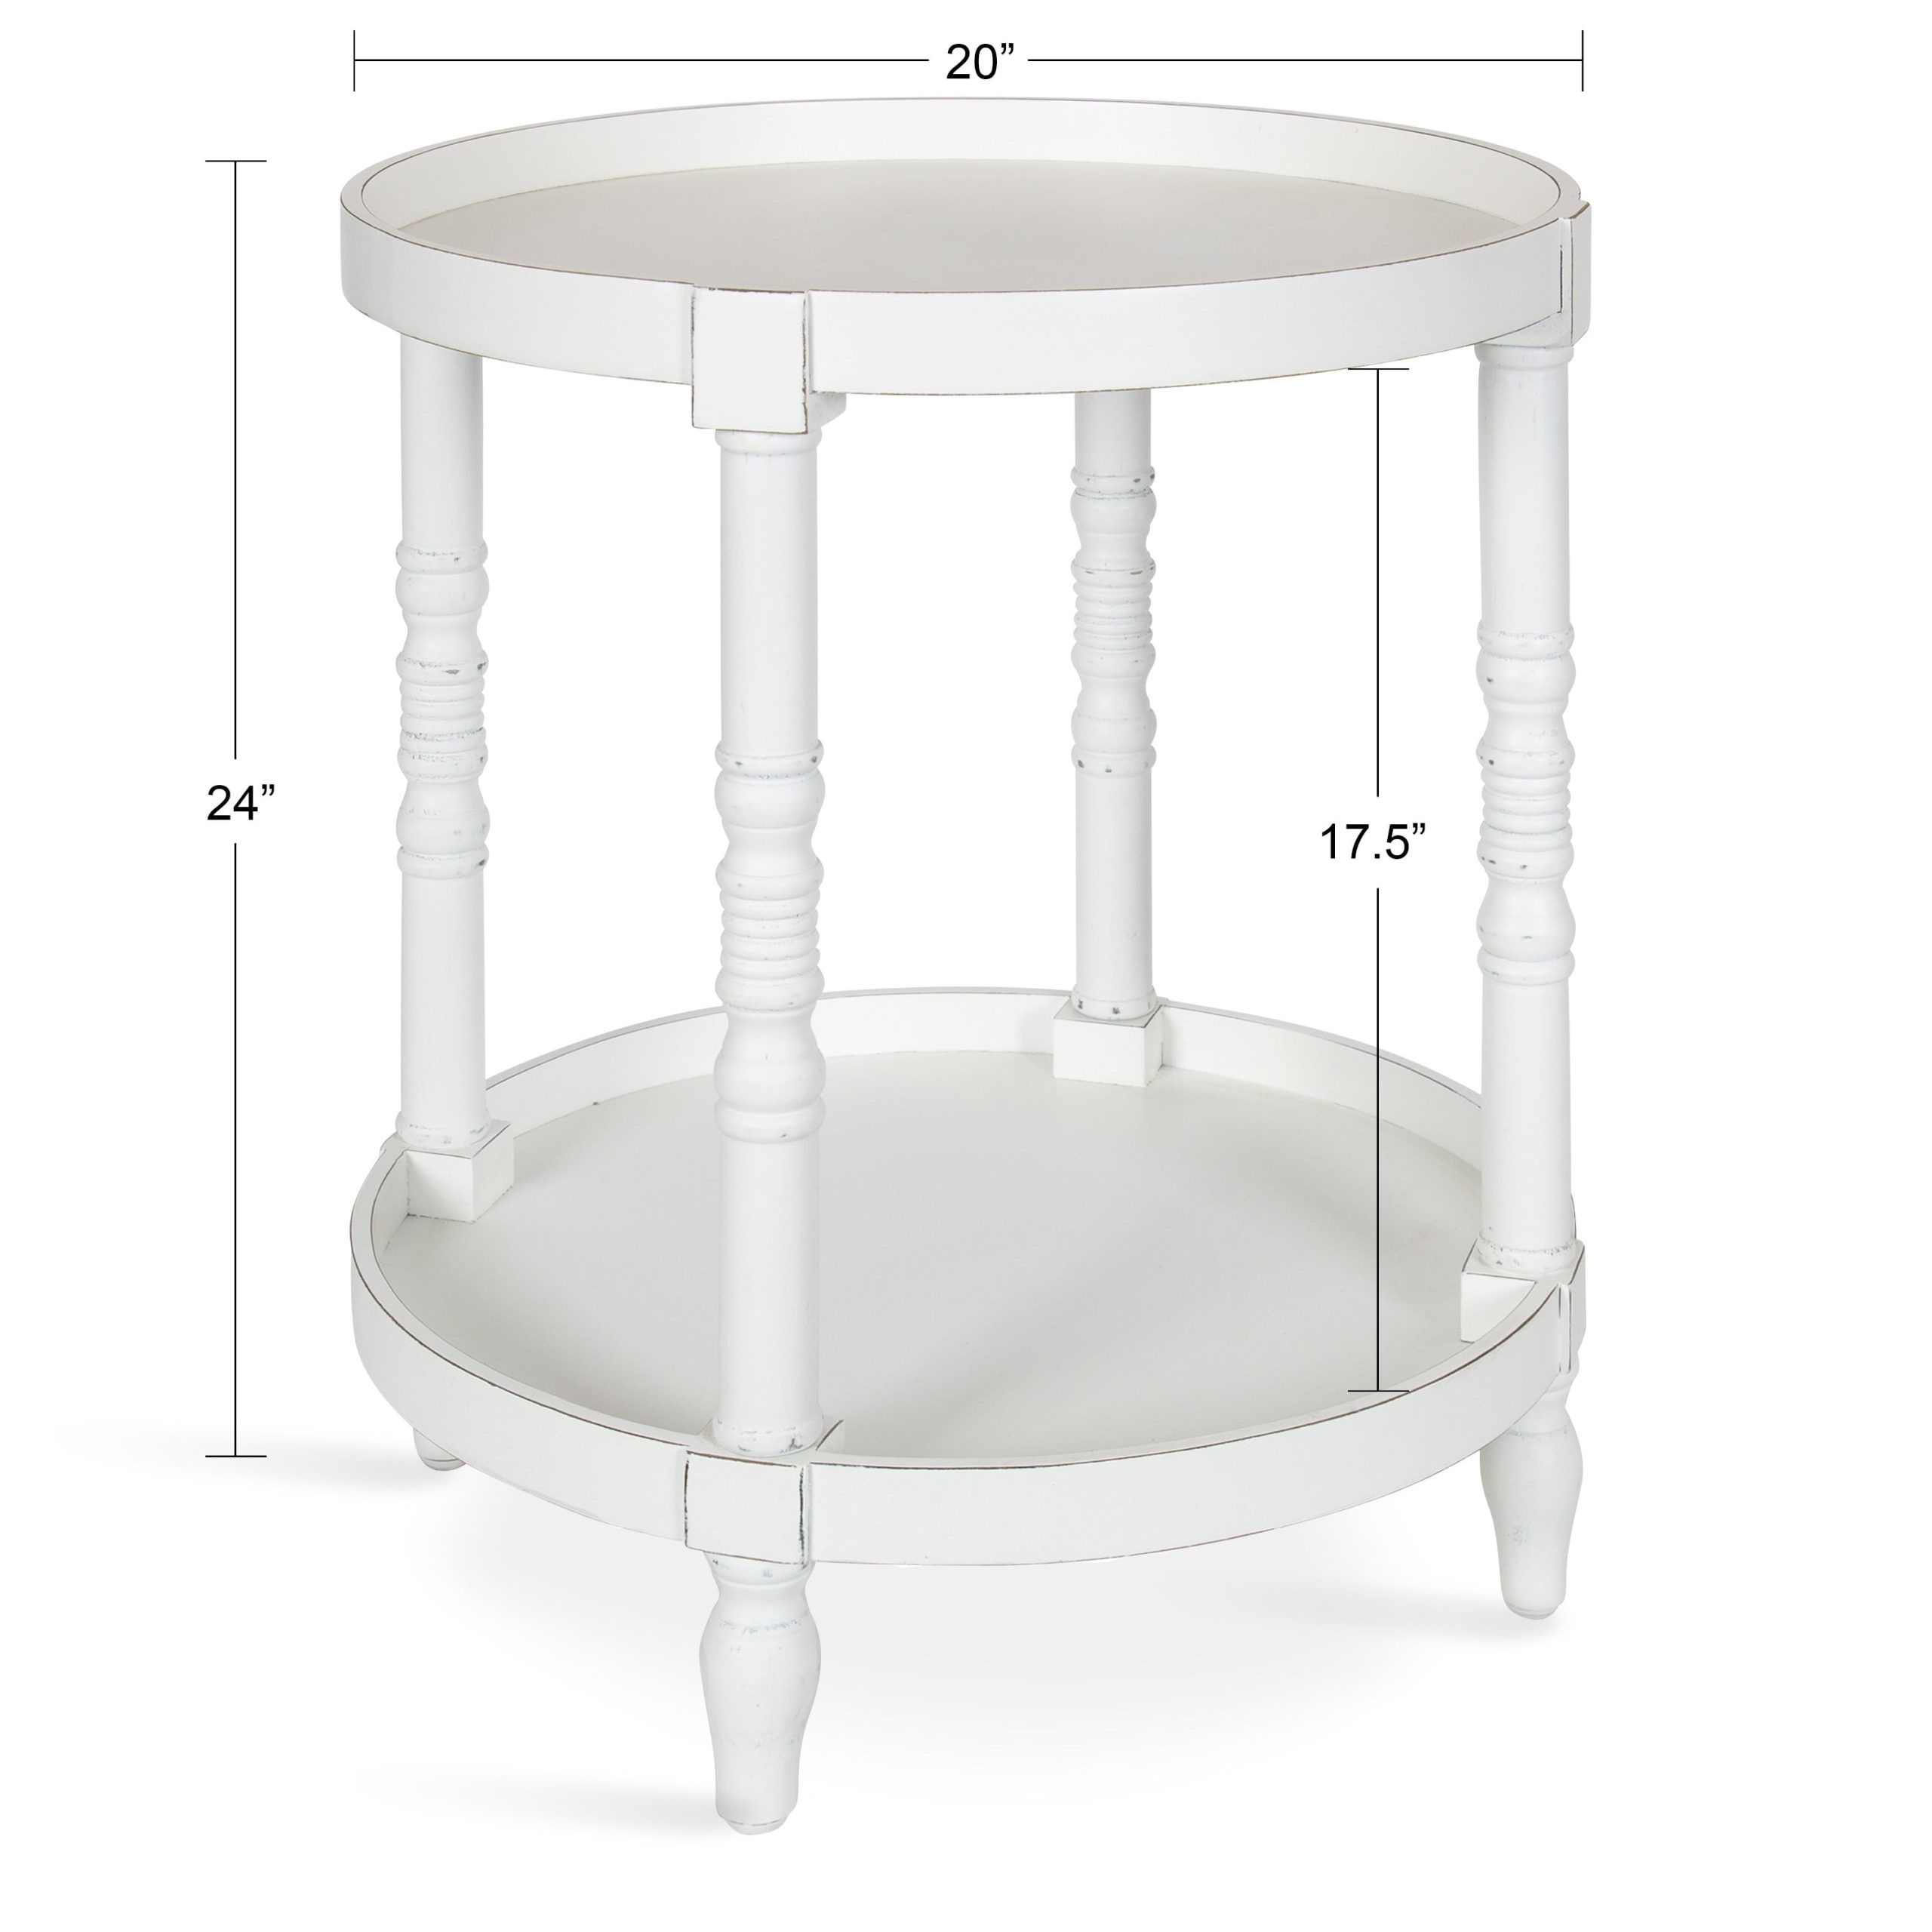 Kate And Laurel Bellport Coastal Round Wood Side Table, 20 X 20 X 24,  White, Chic End Table Accent For Storage And Display – Walmart In Kate And Laurel Bellport Farmhouse Drink Tables (Photo 8 of 15)